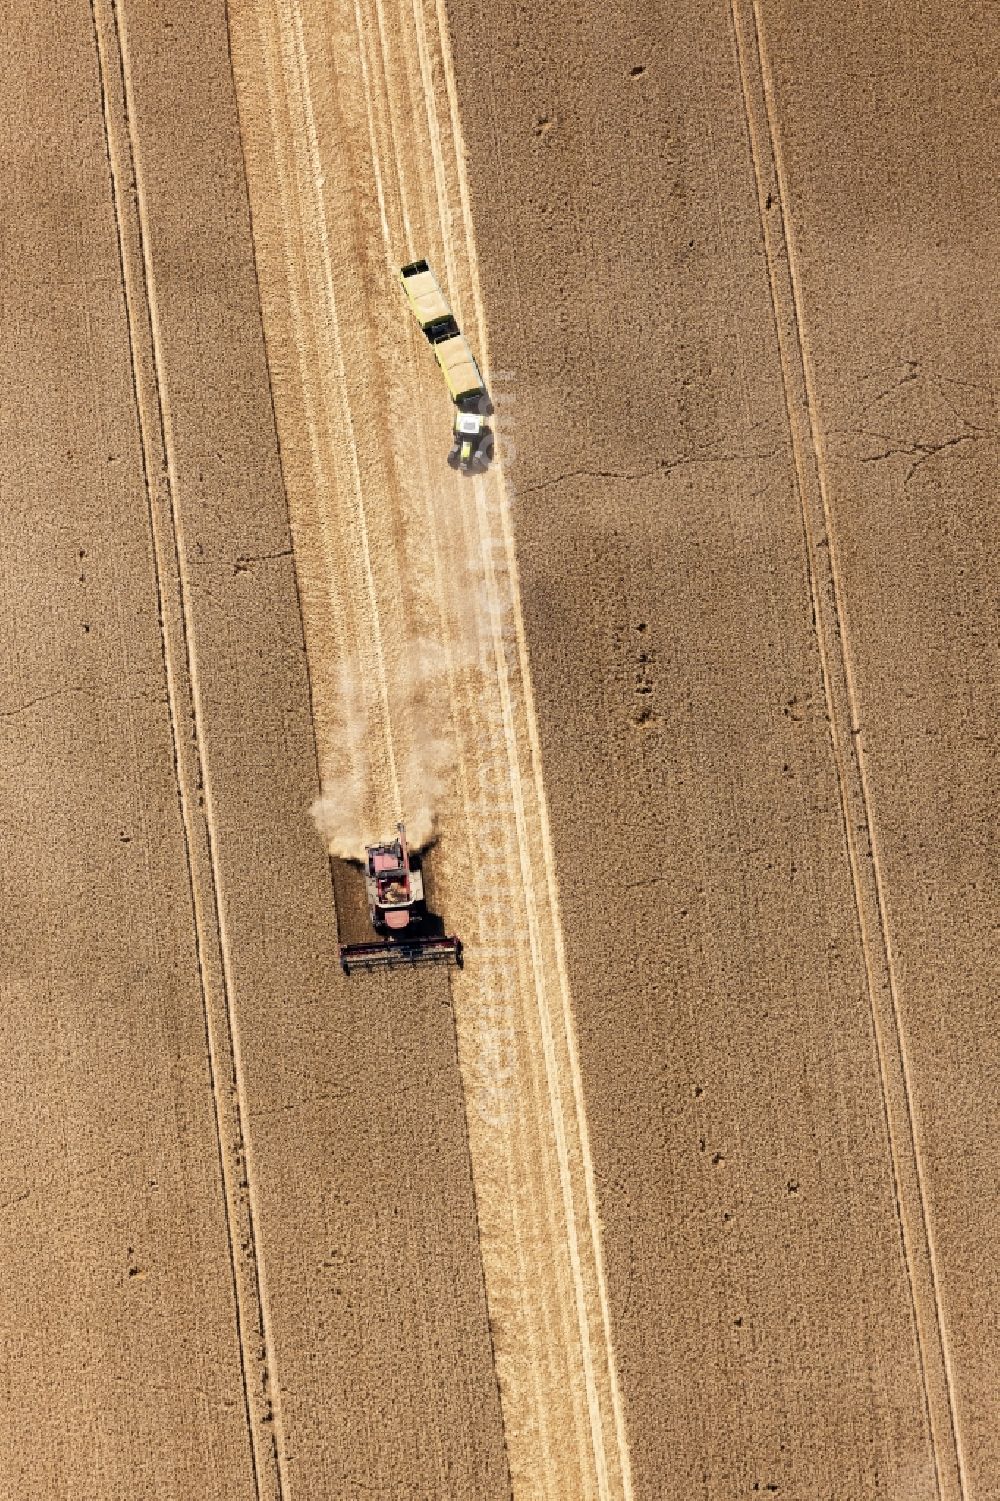 Aerial image Bad Düben - Harvest use of heavy agricultural machinery - combine harvesters and harvesting vehicles on agricultural fields in Bad Dueben in the state Saxony, Germany